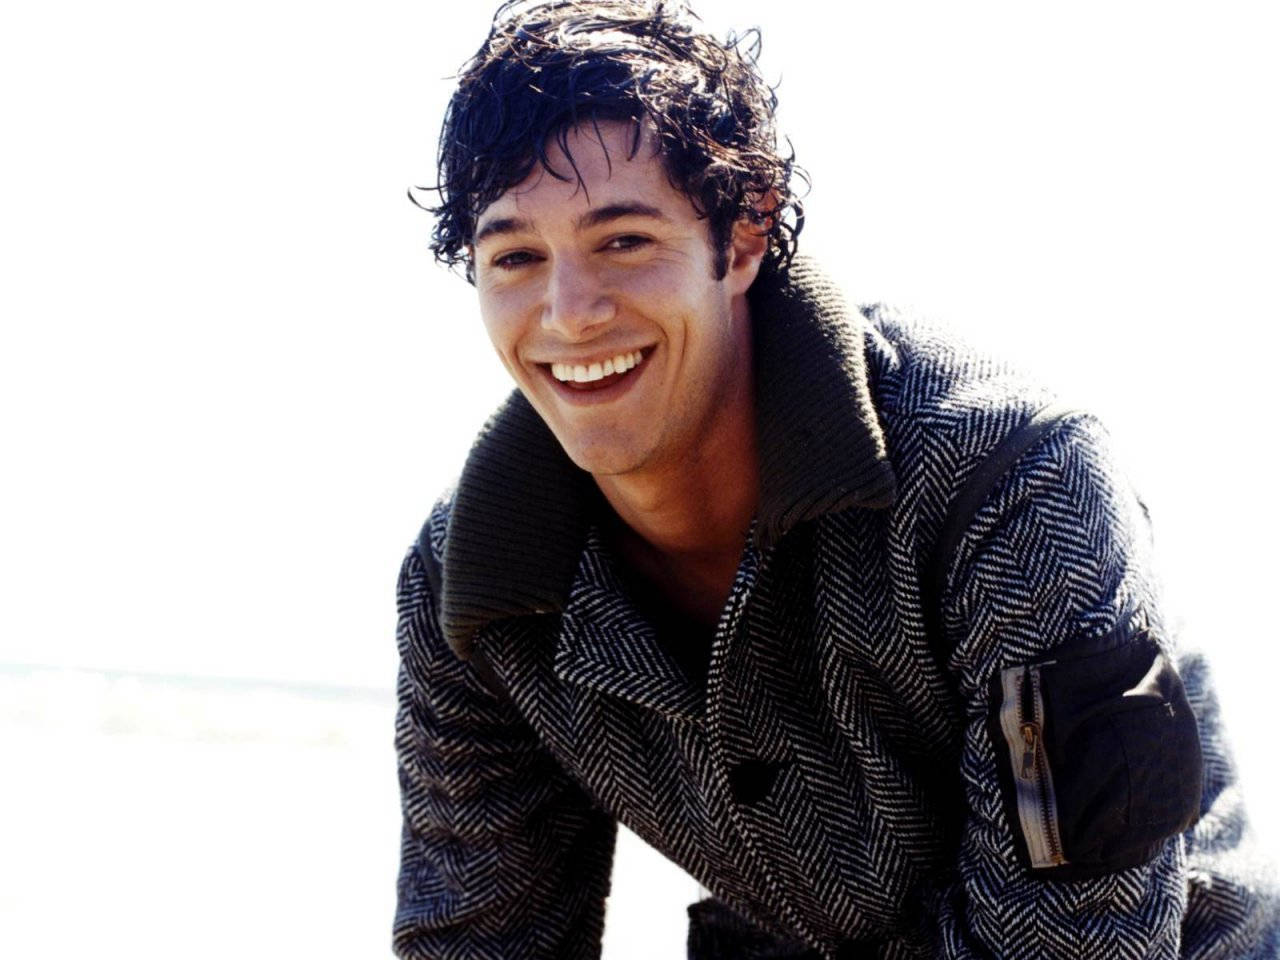 Adambrody Dimple Is Not A Complete Sentence And Does Not Provide Enough Context For Translation. Can You Please Provide A Complete Sentence Or Phrase Related To Computer Or Mobile Wallpaper? Wallpaper